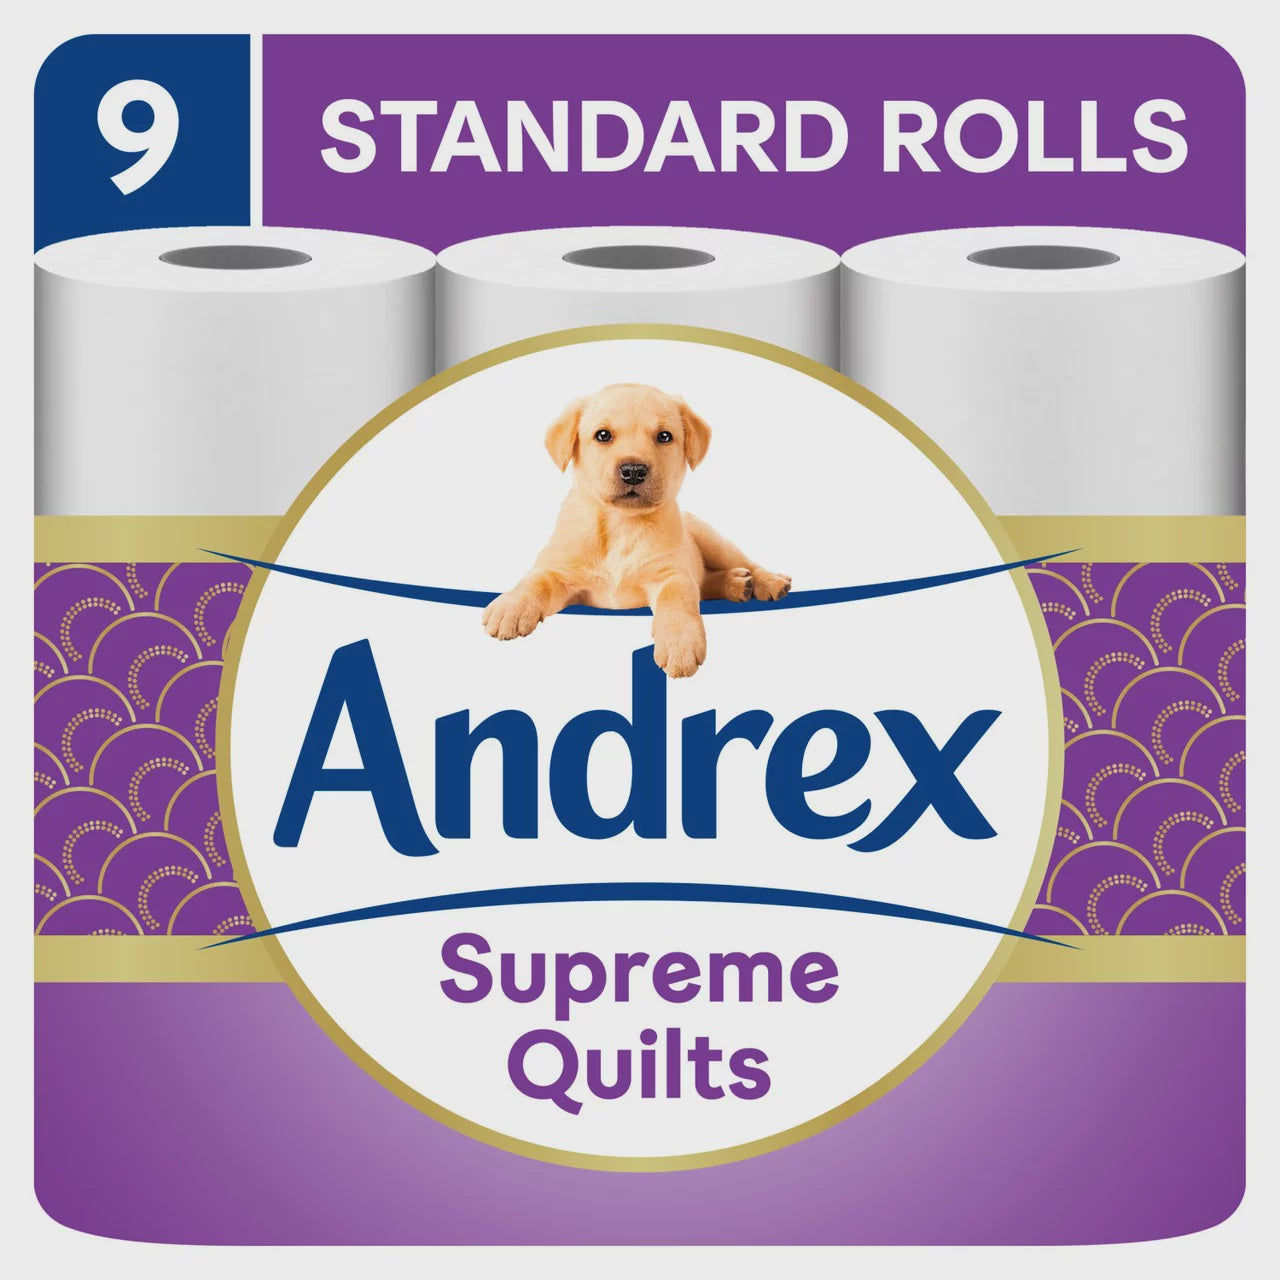 Andrex Supreme Quilts Toilet Roll 9pk